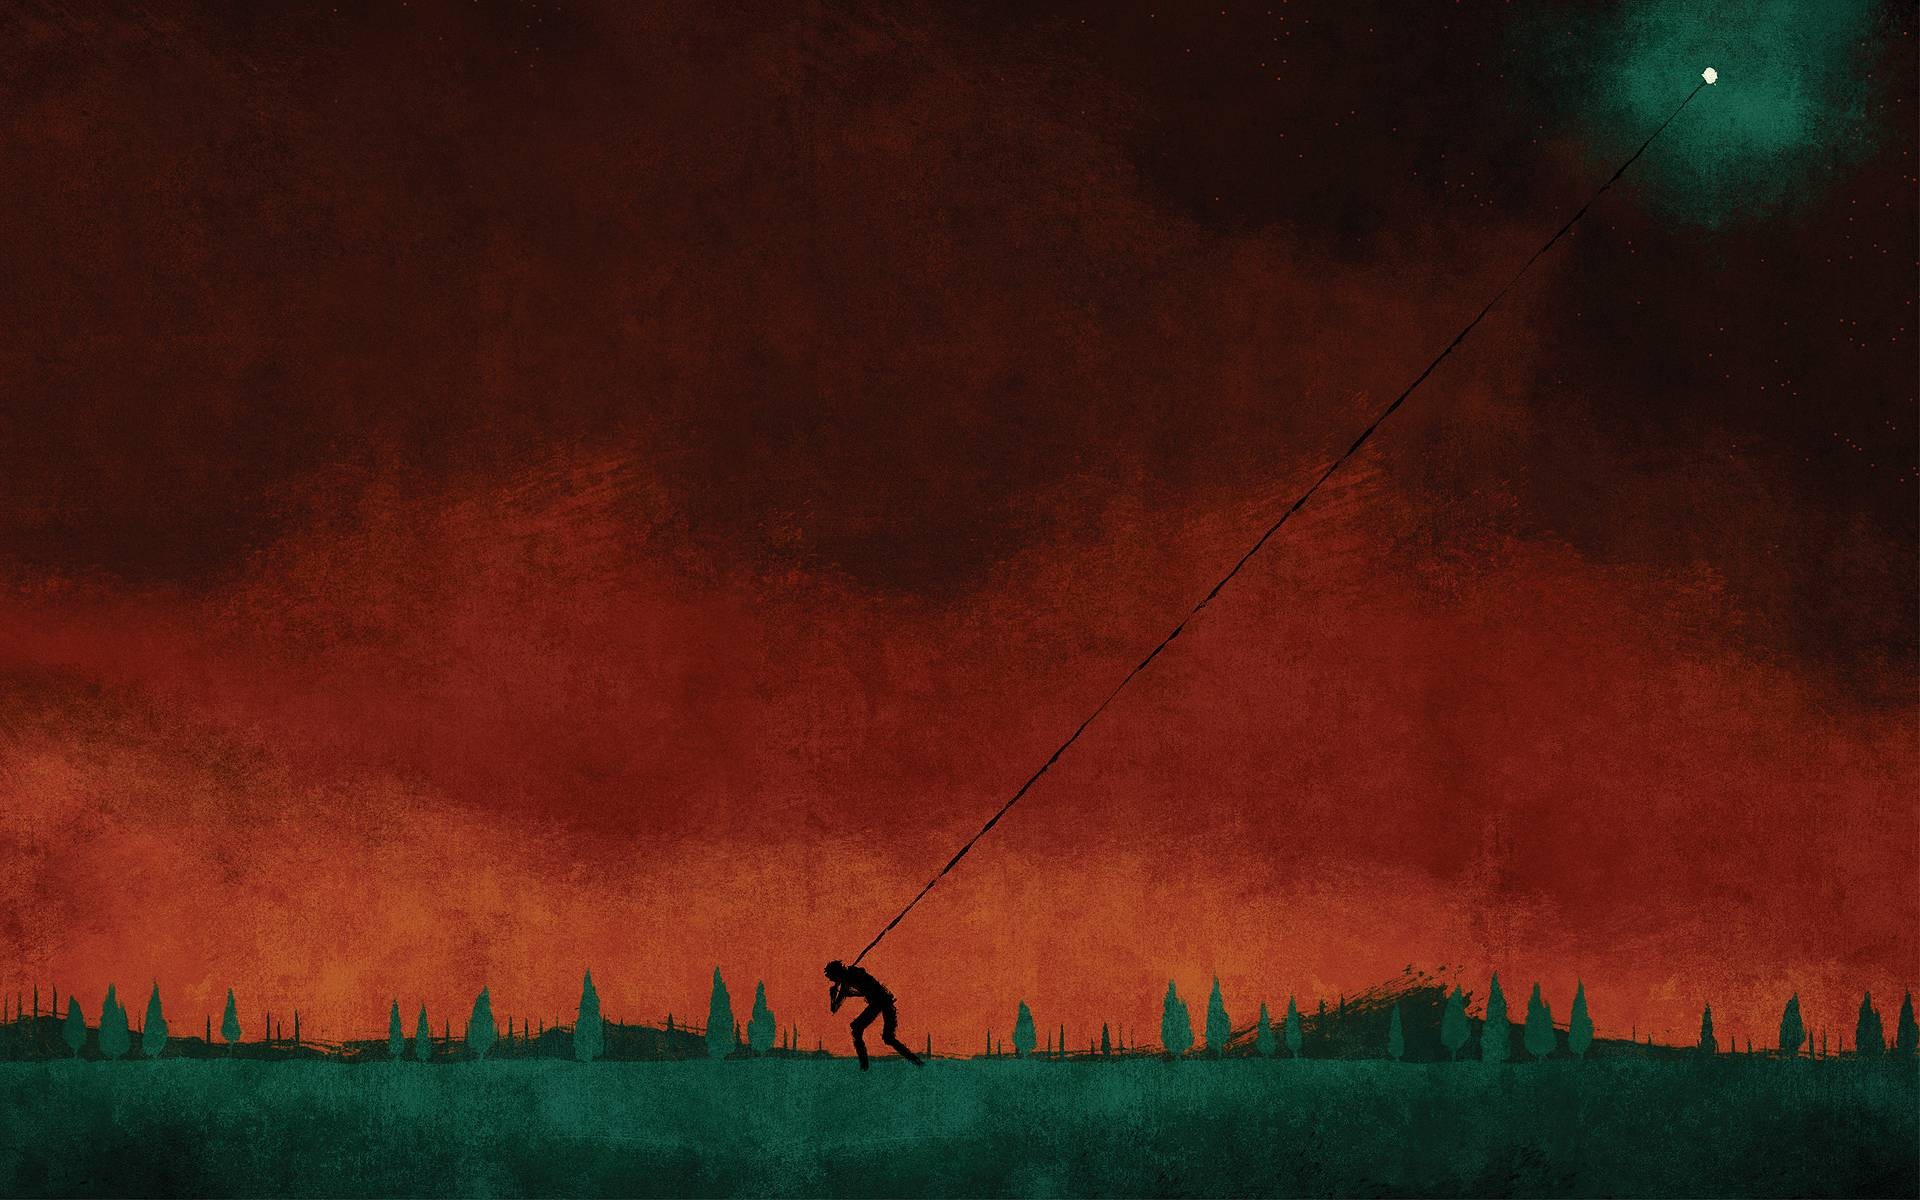 General 1920x1200 August Burns Red Moon digital art people painting artwork silhouette nature field album covers cover art trees ropes hills red